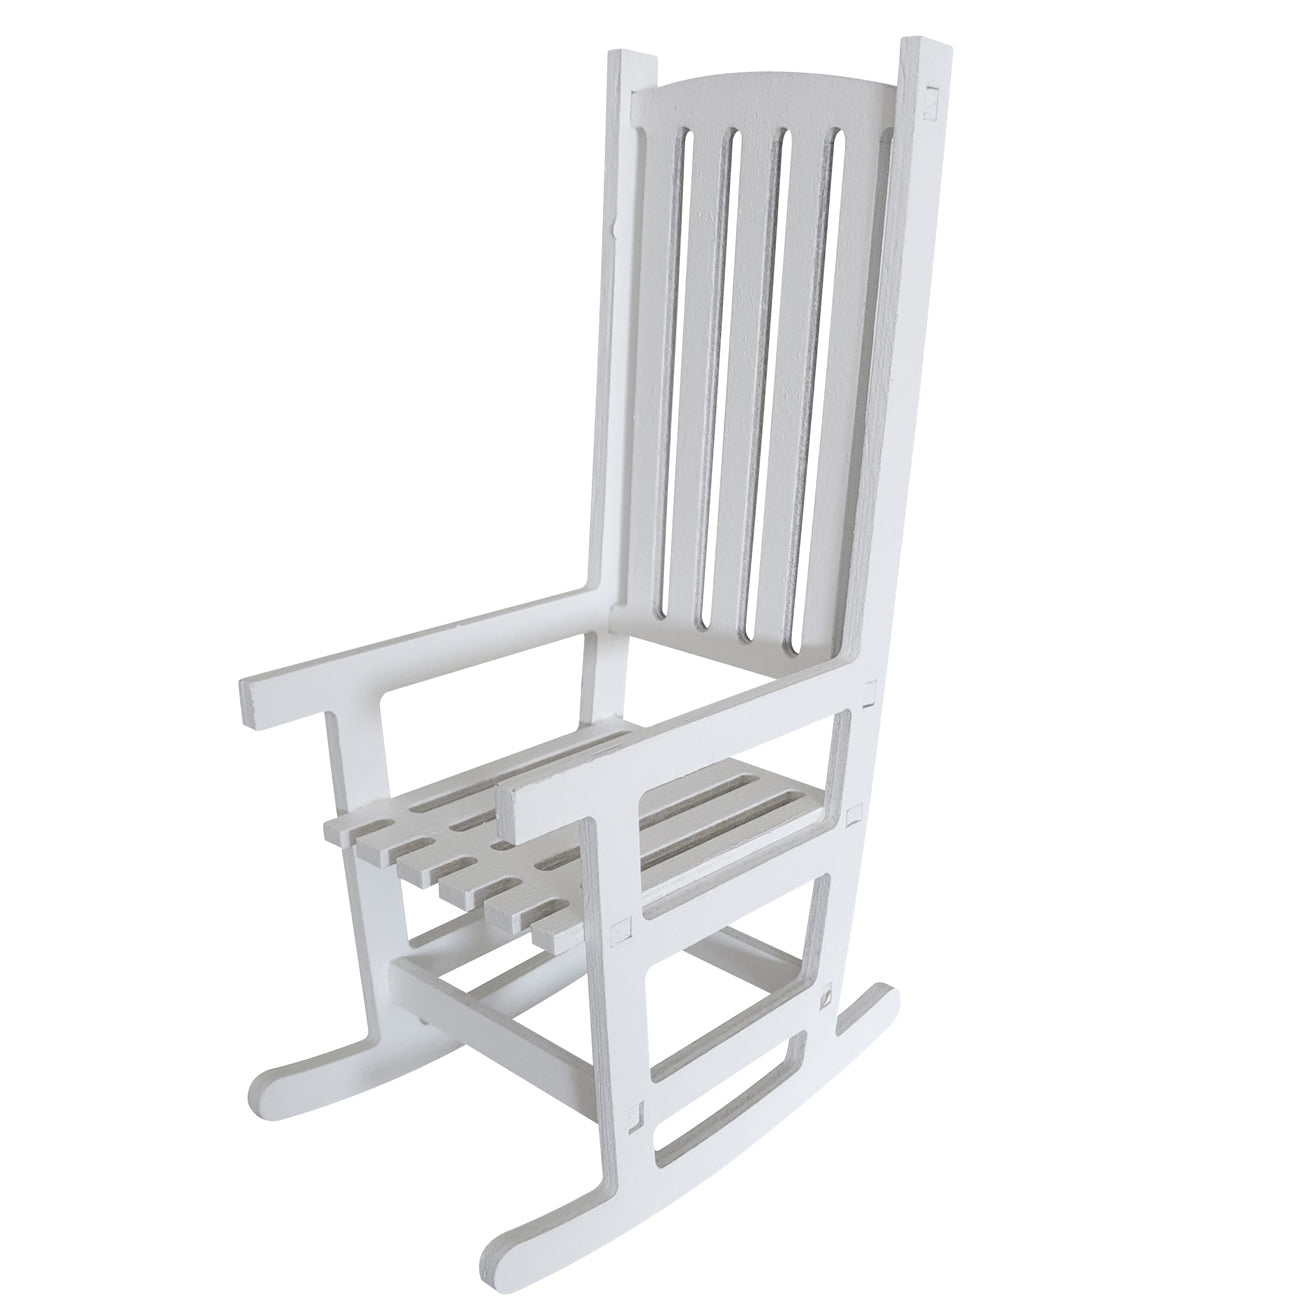 Wooden miniature rocking chair with minor imperfections